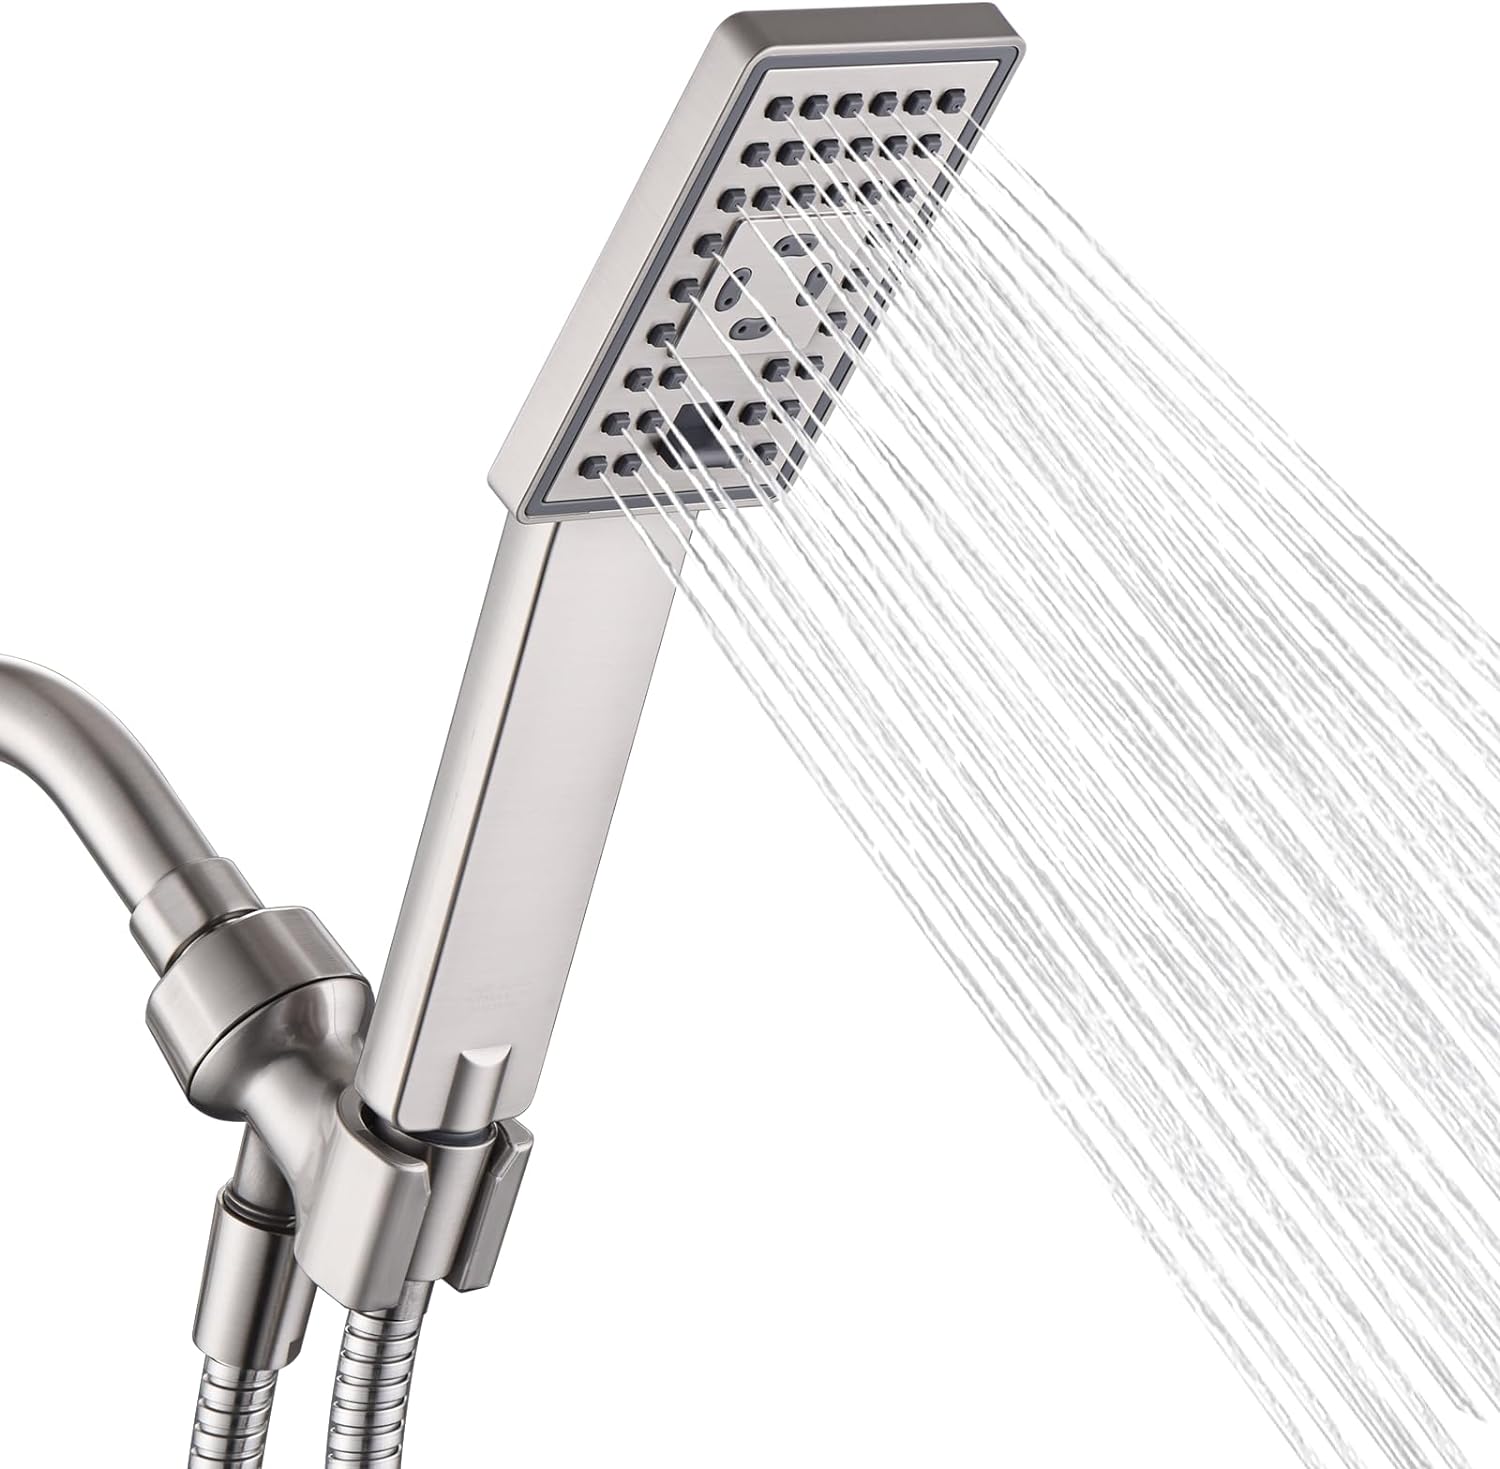 BRIGHT SHOWERS High Pressure Handheld Shower Head Set, High Flow Hand Held Showerhead with 60 Long Stainless Steel Hose and Adjustable Wall Bracket, 3 Spray Setting Shower Wand, Brushed Nickel